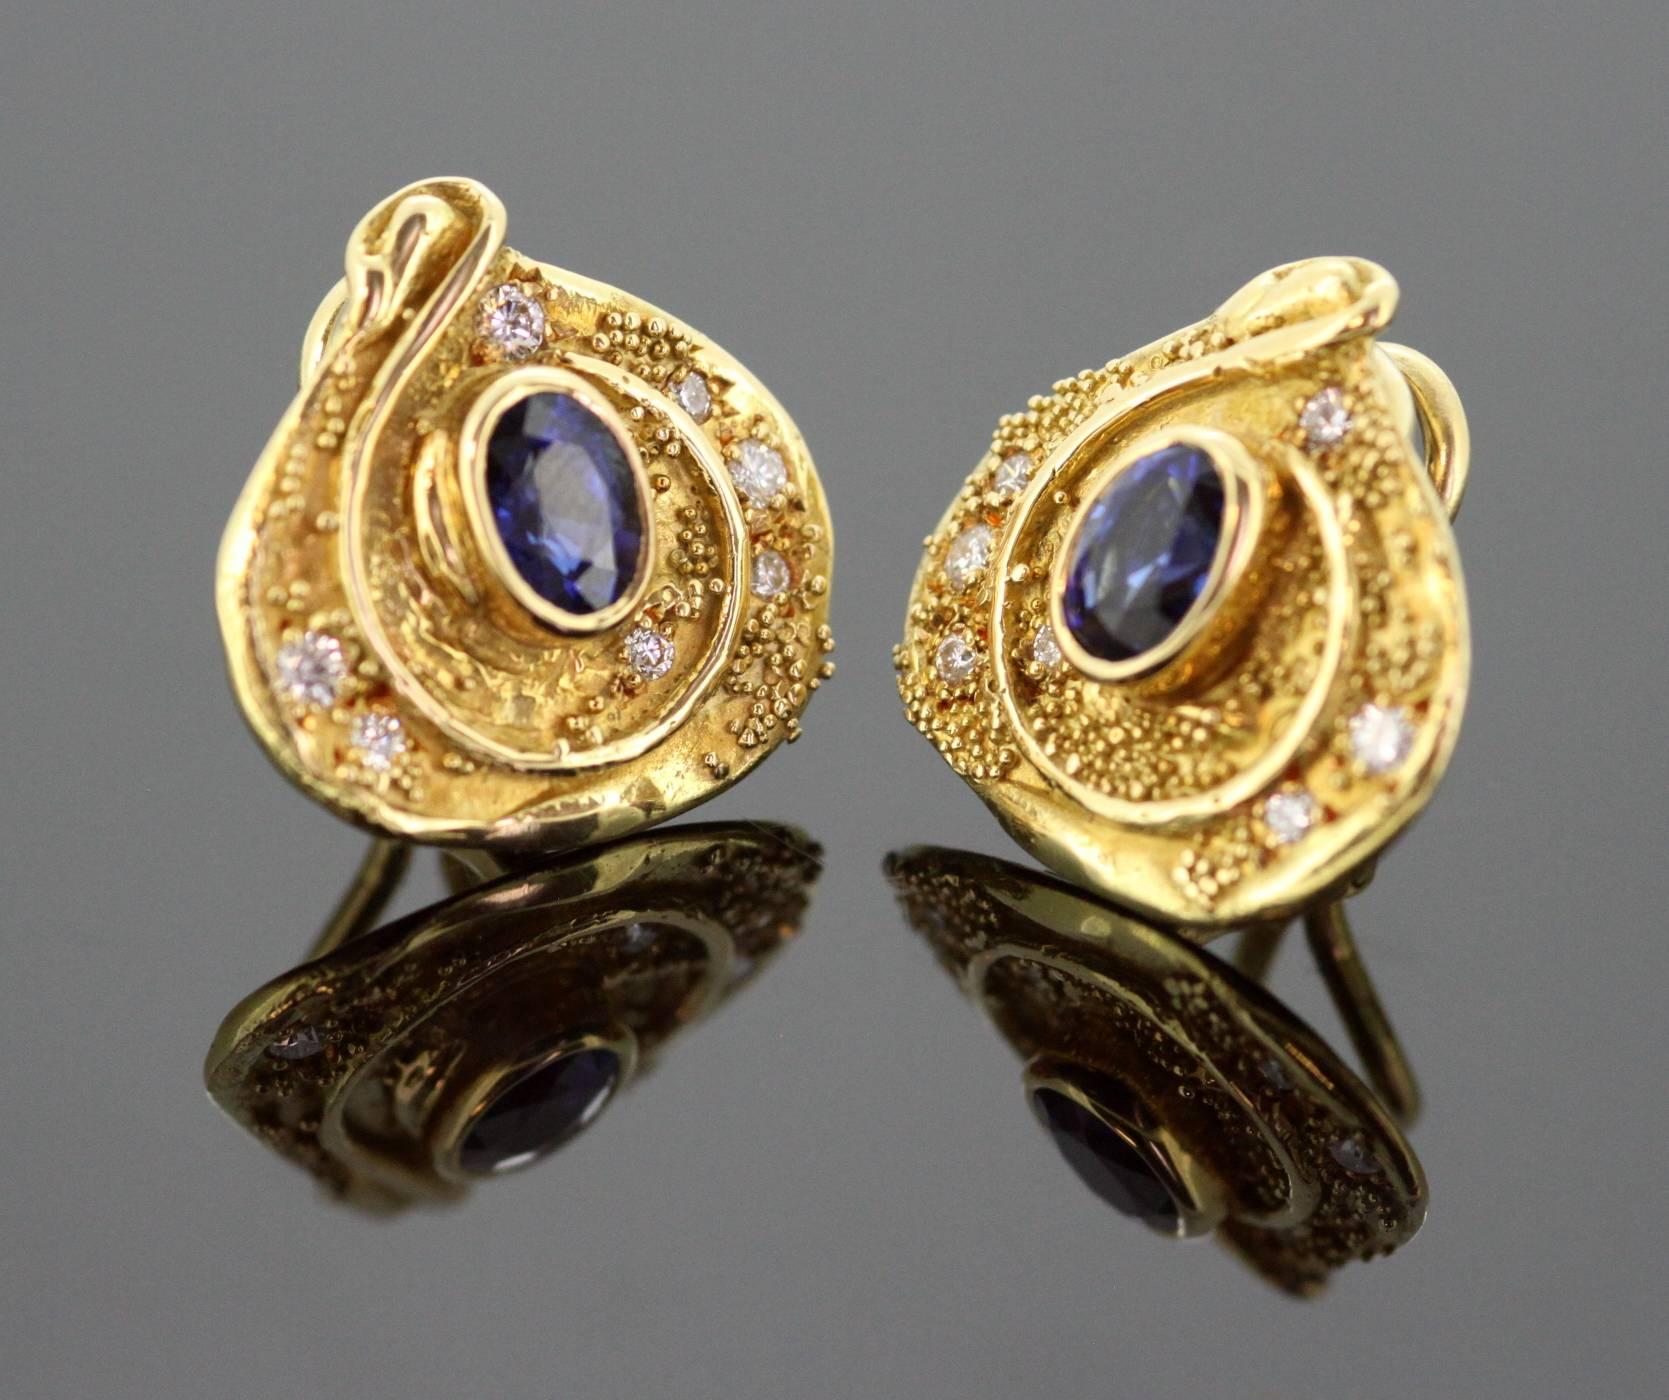 Vintage 18K Yellow Gold Clip on Earrings With Blue Sapphire (1 CT Total) and Diamonds (0.22 CT Total) 
Designer : Elizabeth Gage 
London 2006 
Fully hallmarked. 

Dimensions - 
Size : 1.8 x 1.8 x 1 cm 
Weight : 11 grams total 

Condition :General